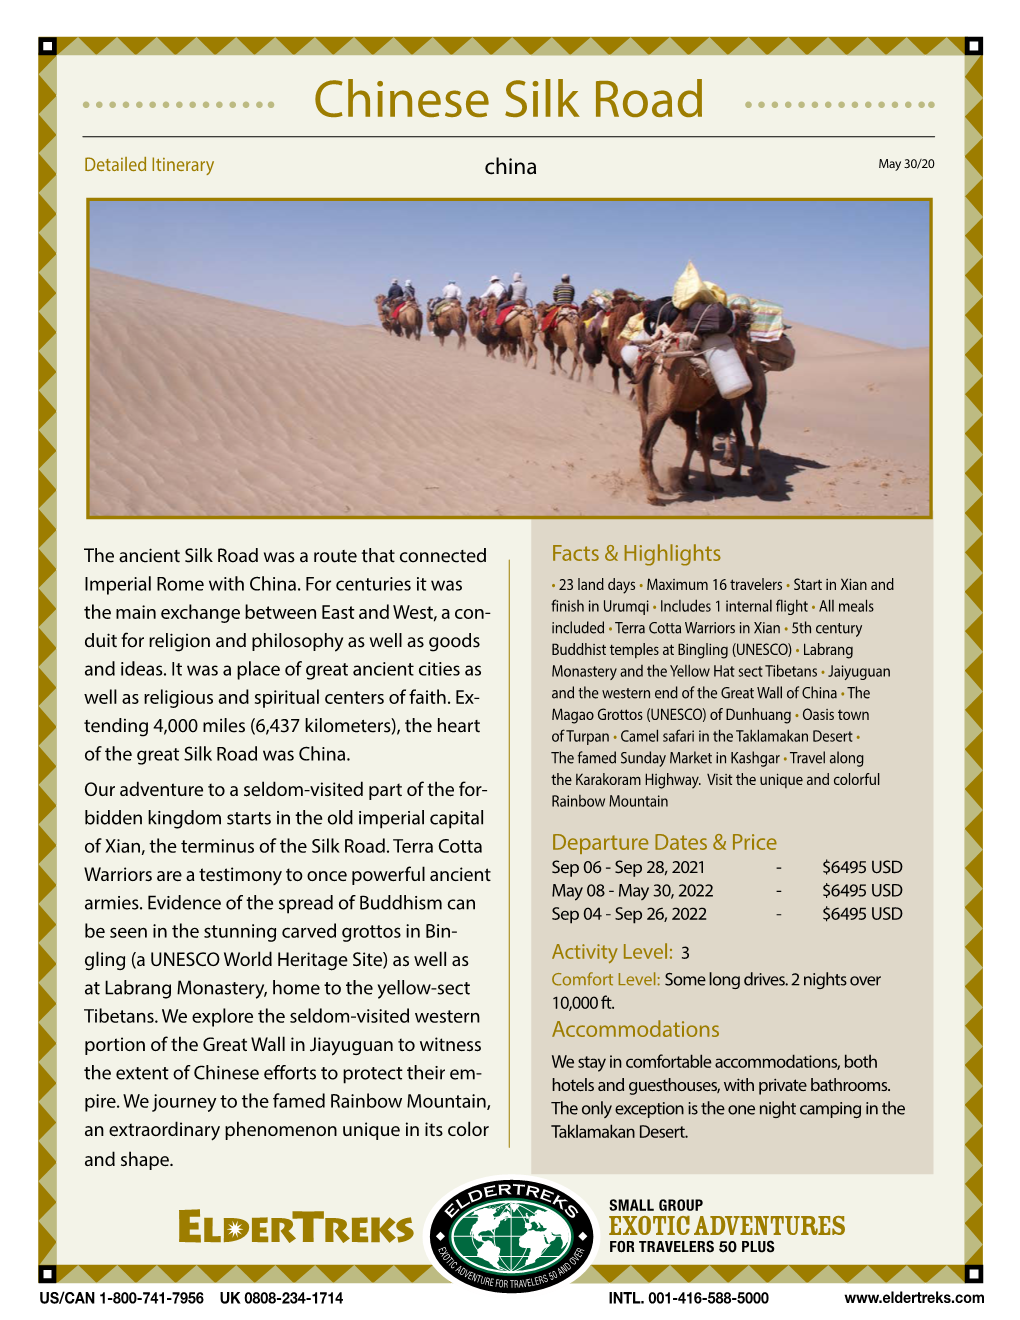 Download Chinese Silk Road Detailed Itinerary